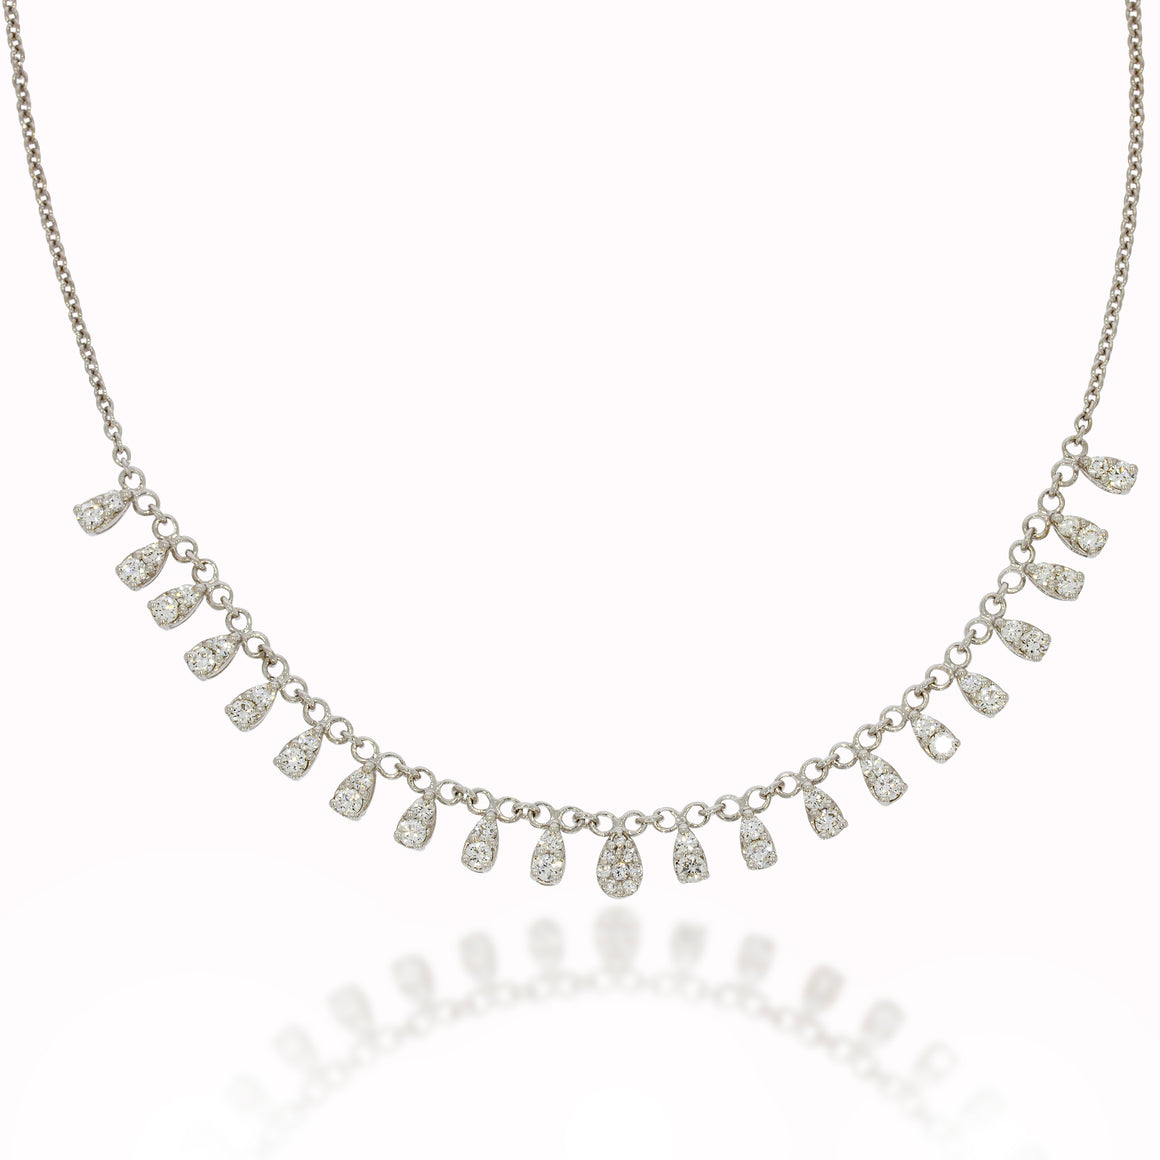 Sparkling drops necklace Gracefully suspended from a delicate chain. The diamond pendants radiating a majestic and opulent charm.